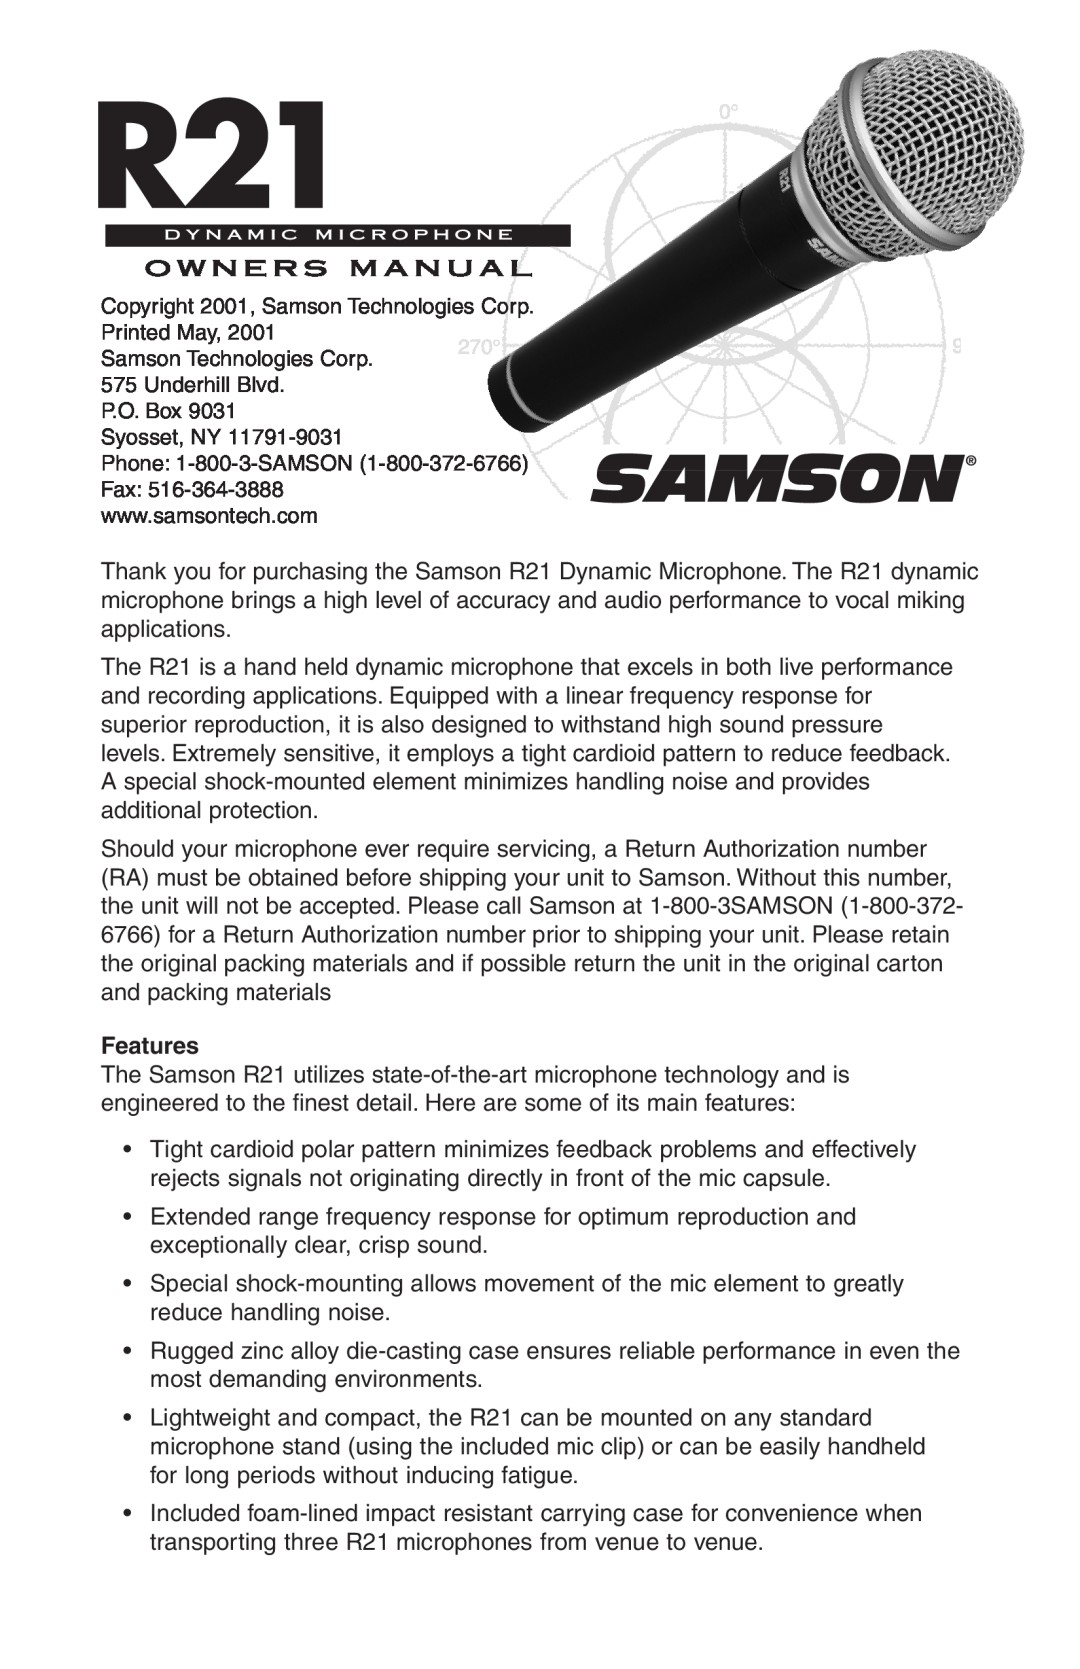 Samson R21 owner manual Features 